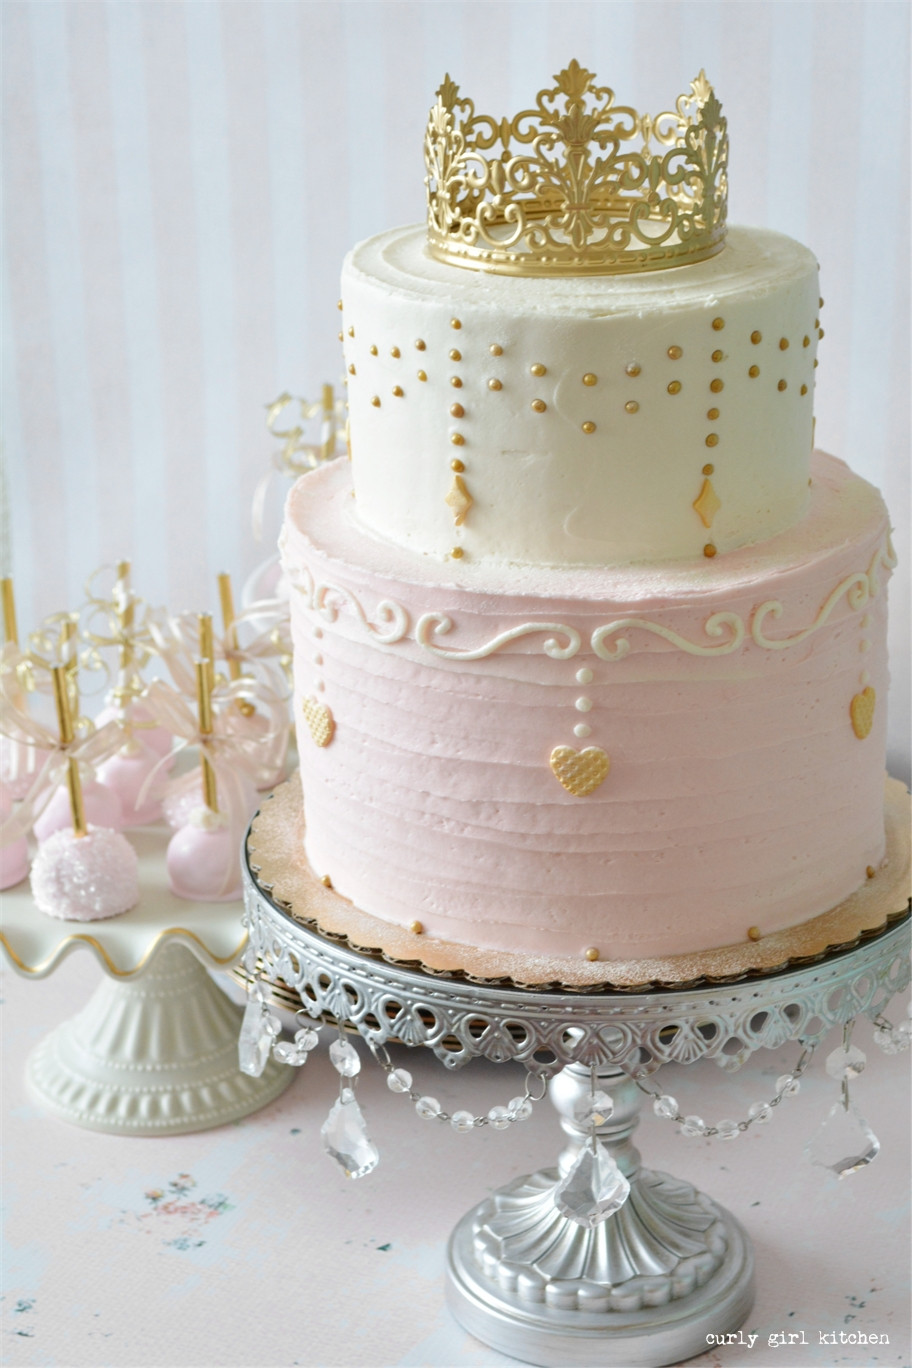 Princess Birthday Cake Ideas
 Curly Girl Kitchen Pink and Gold Princess Party Cake